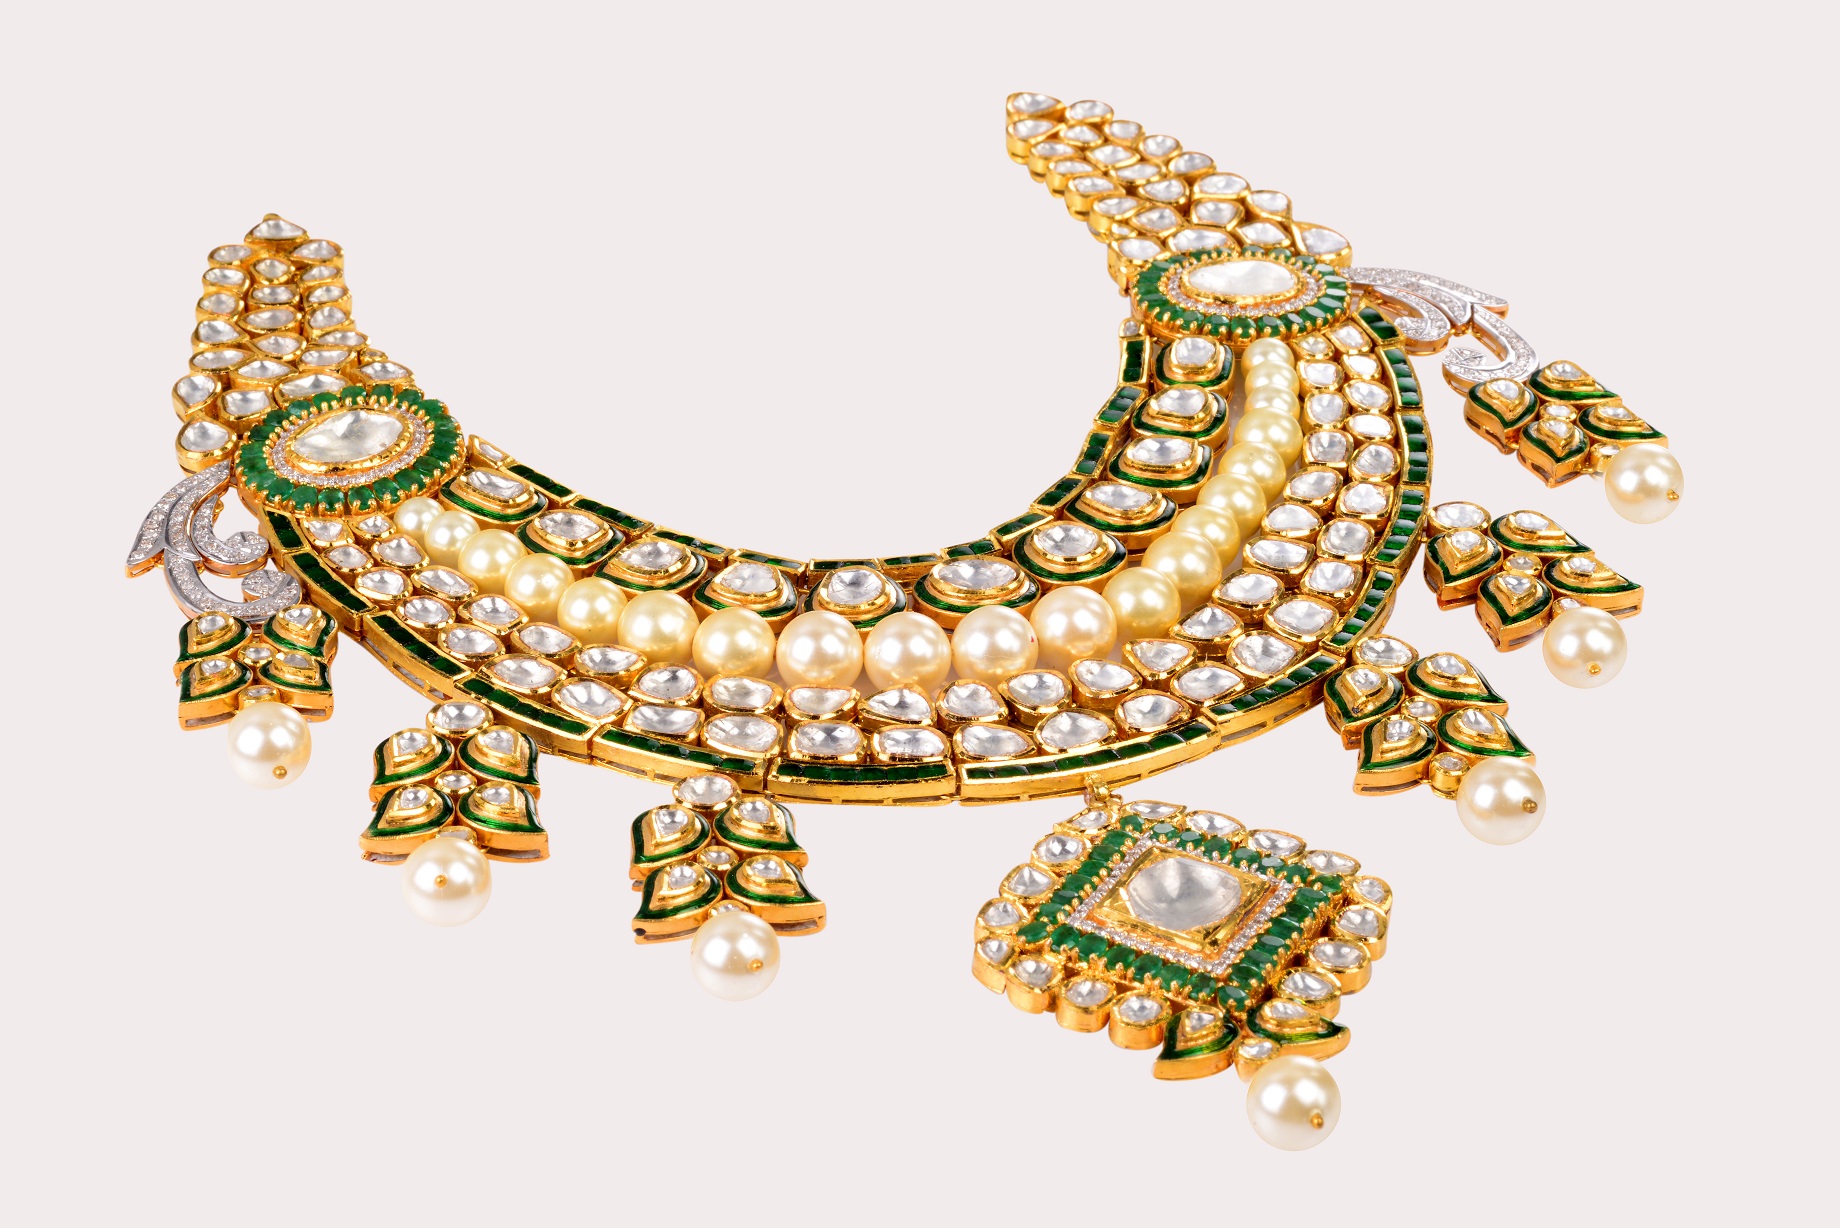 Polki necklace by SLG Jewellers, New Delhi